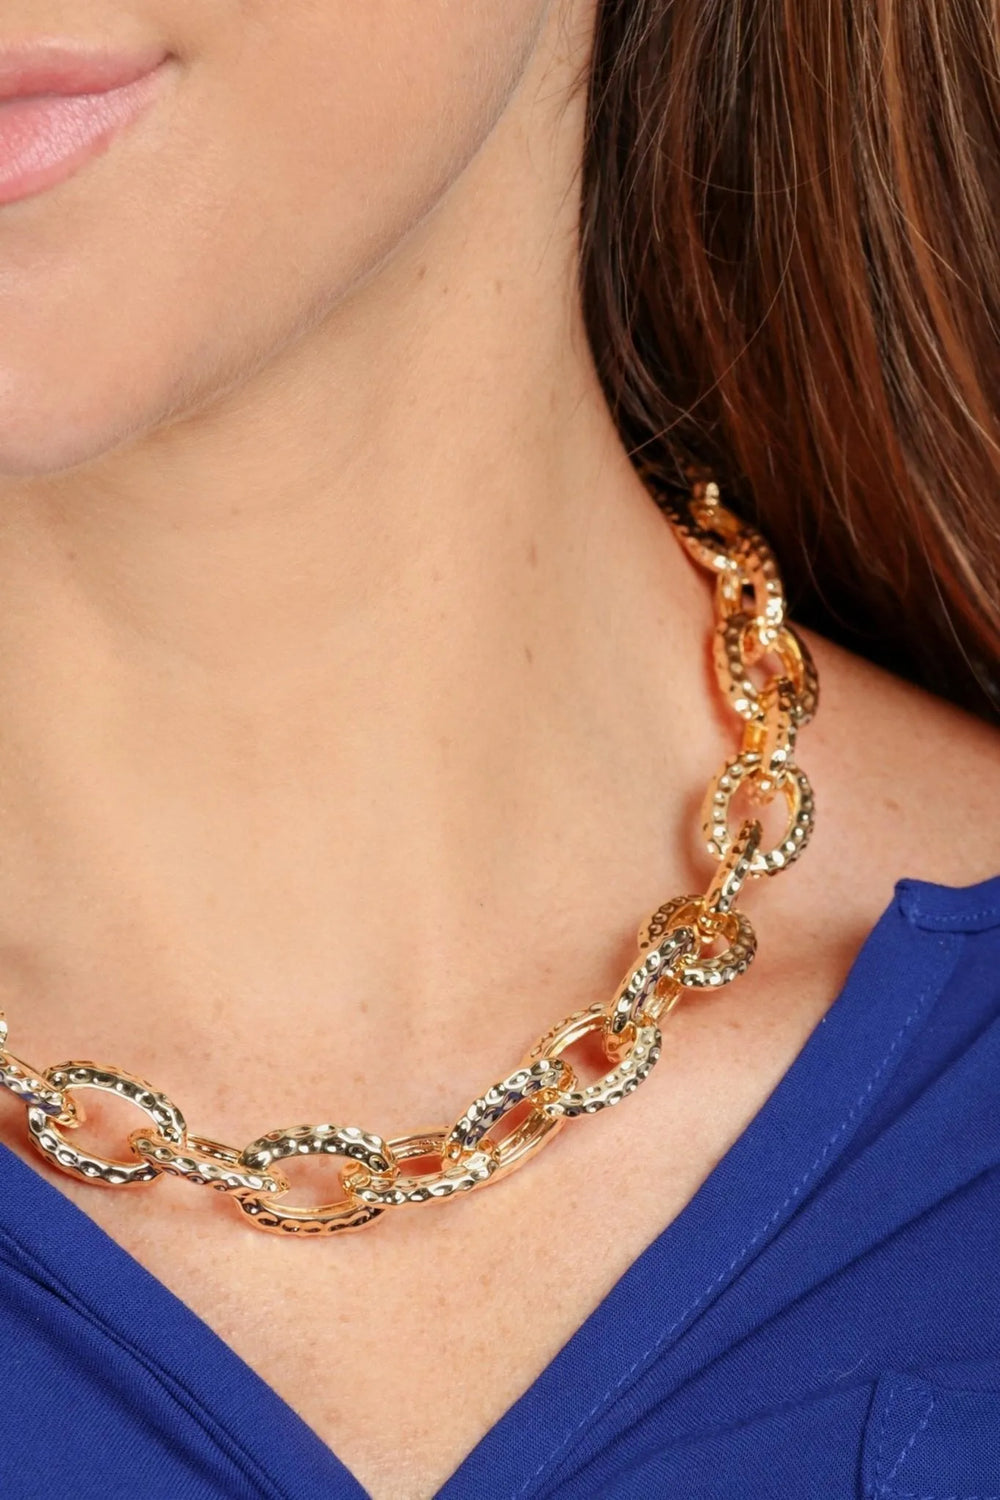 Hammered Chain Necklace Gold